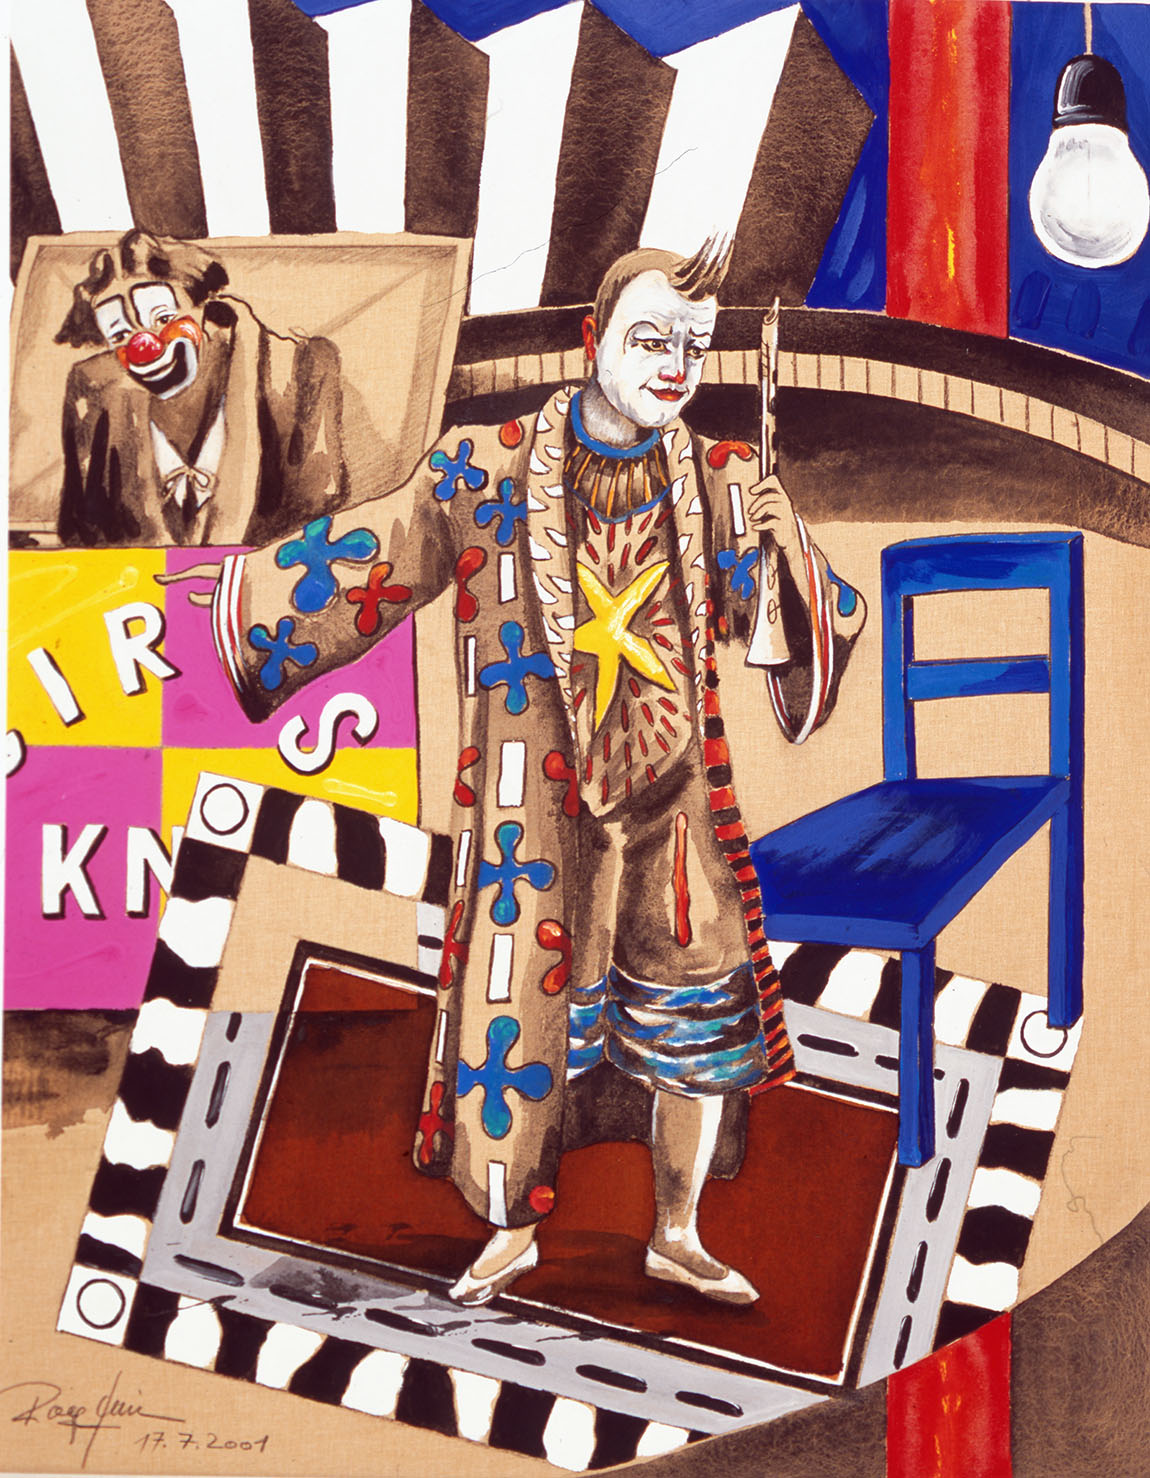 ROLF KNIE – ART FROM THE SWISS CIRCUS DYNASTY